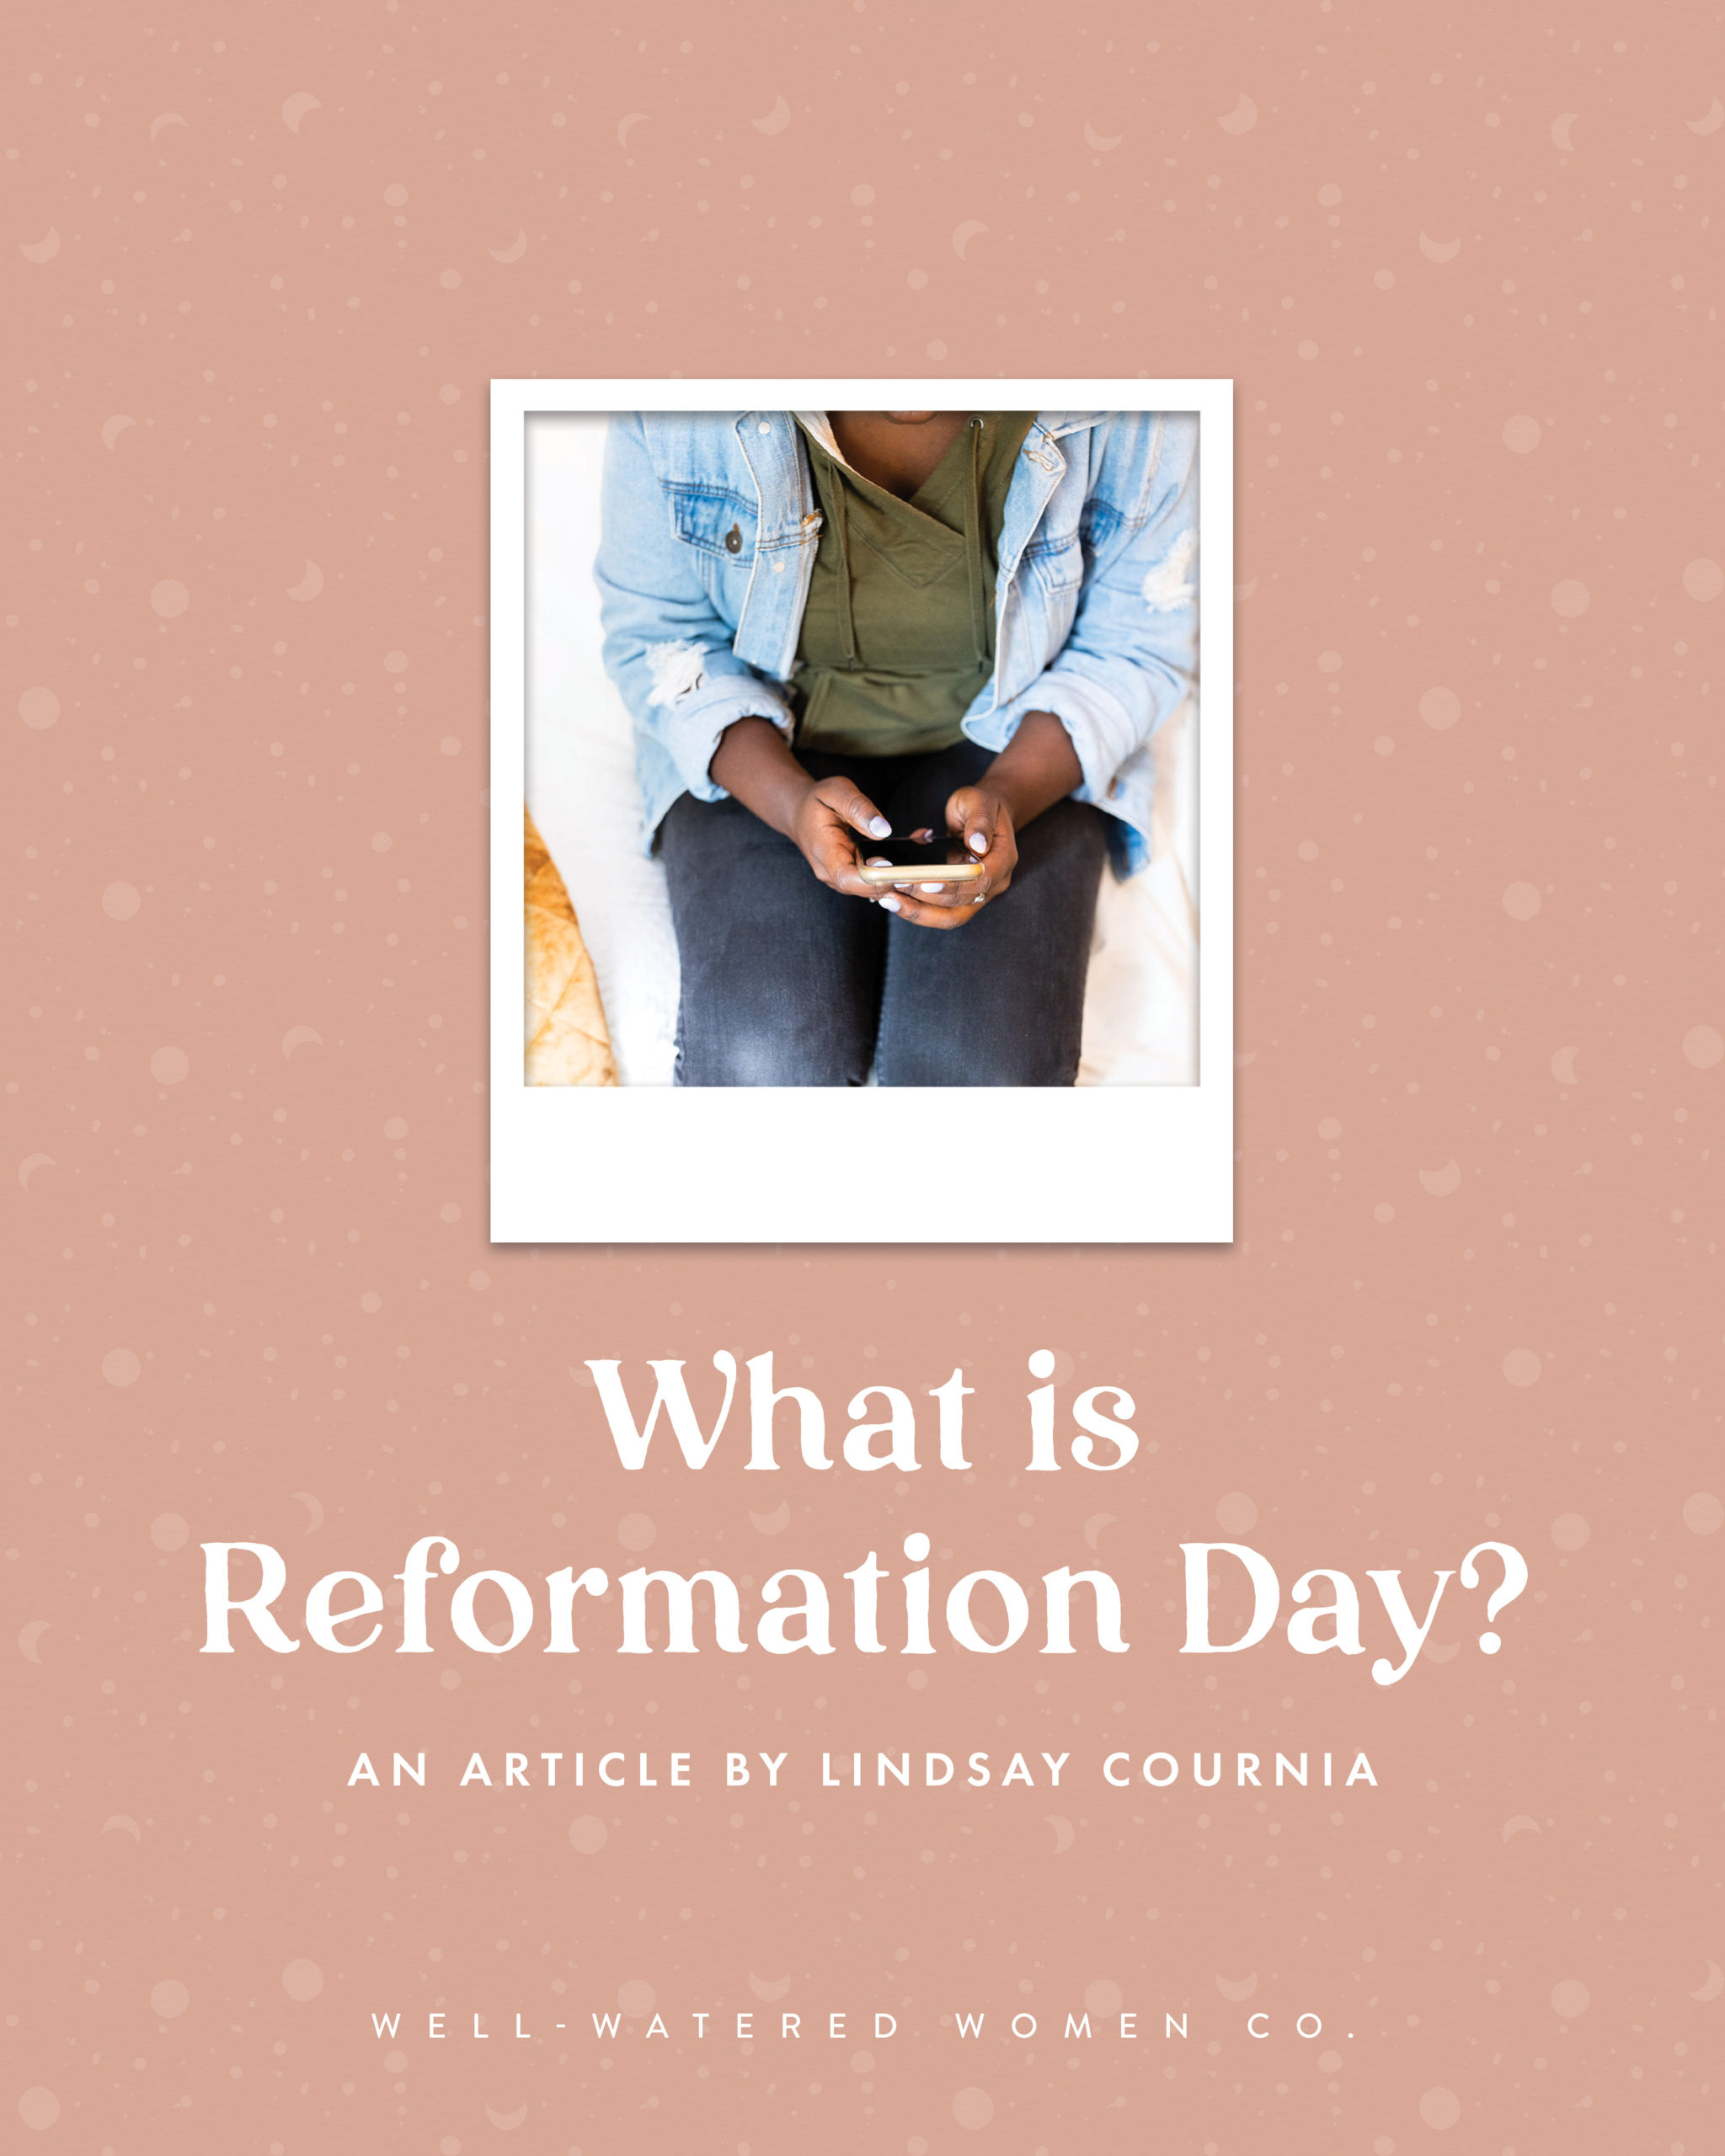 What is Reformation Day?